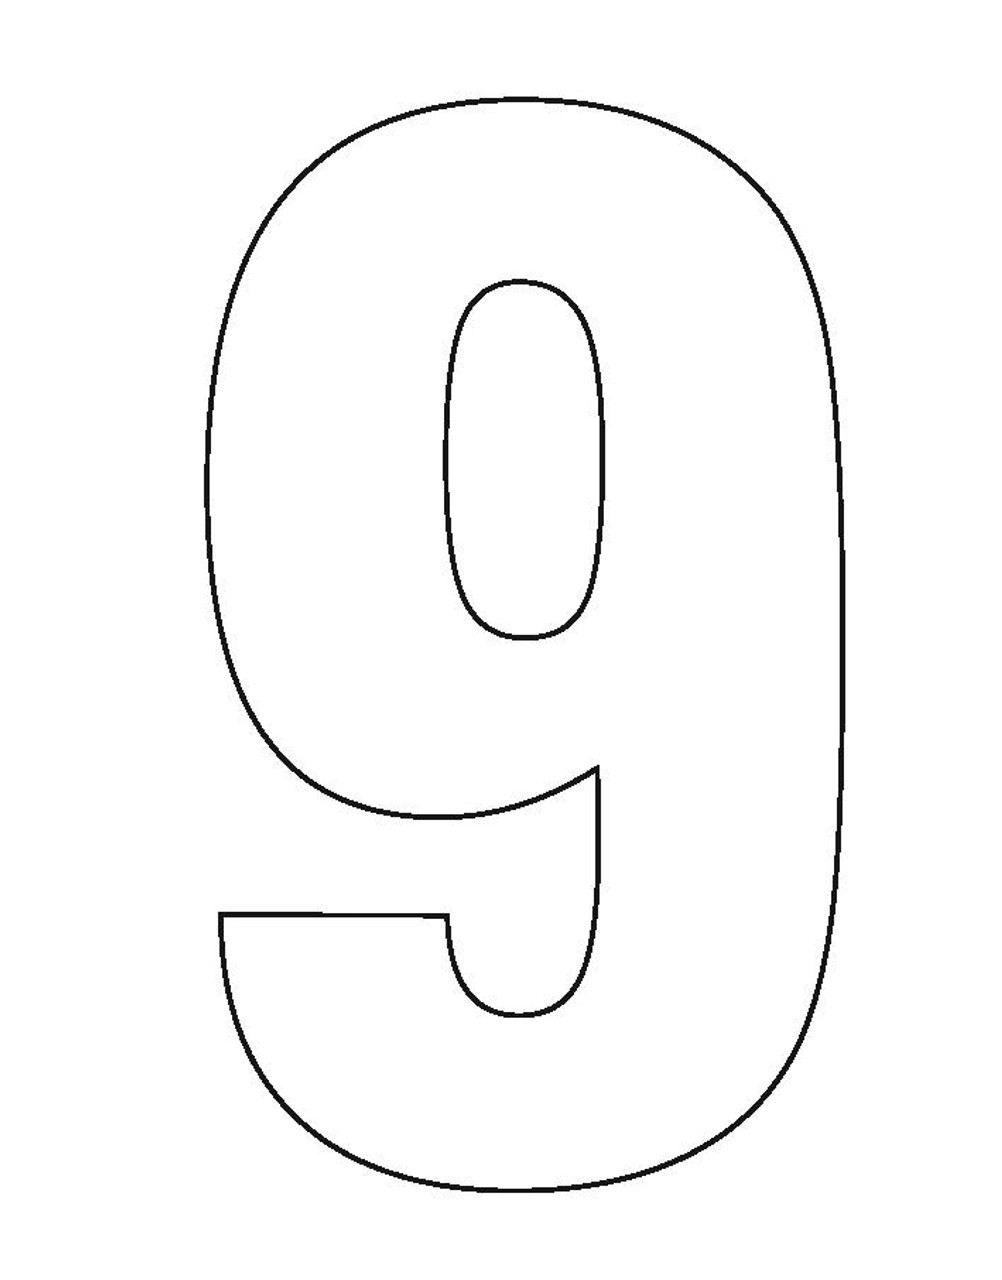 PCNUM09 - A generously sized white sticker of the number 9